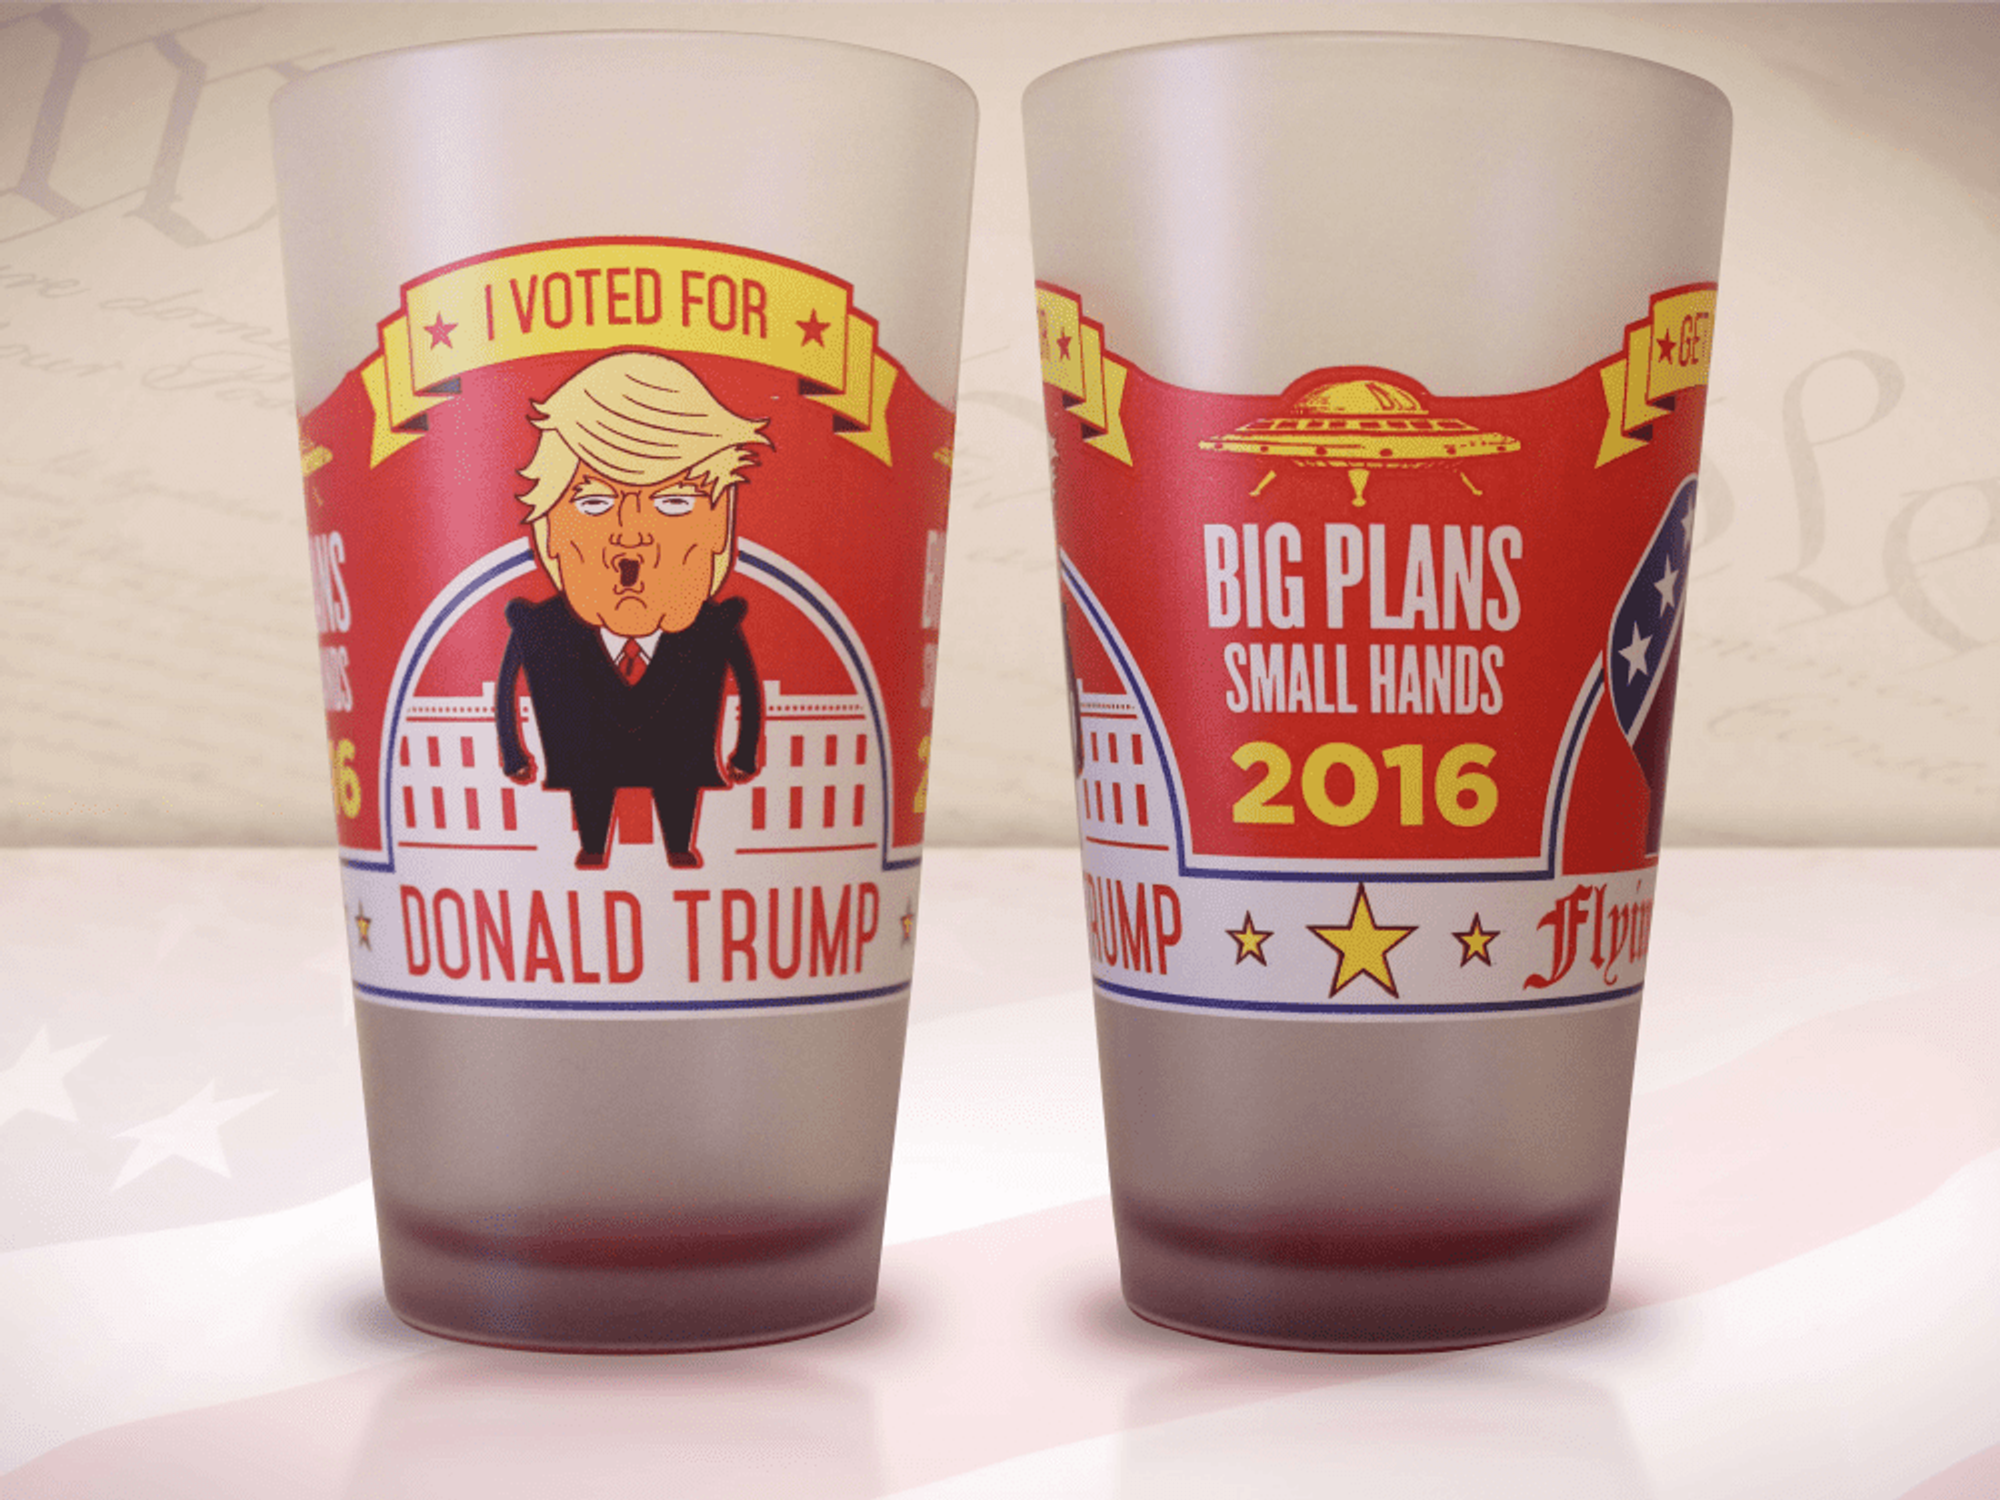 Donald Trump for president beer glasses available for the voting public.